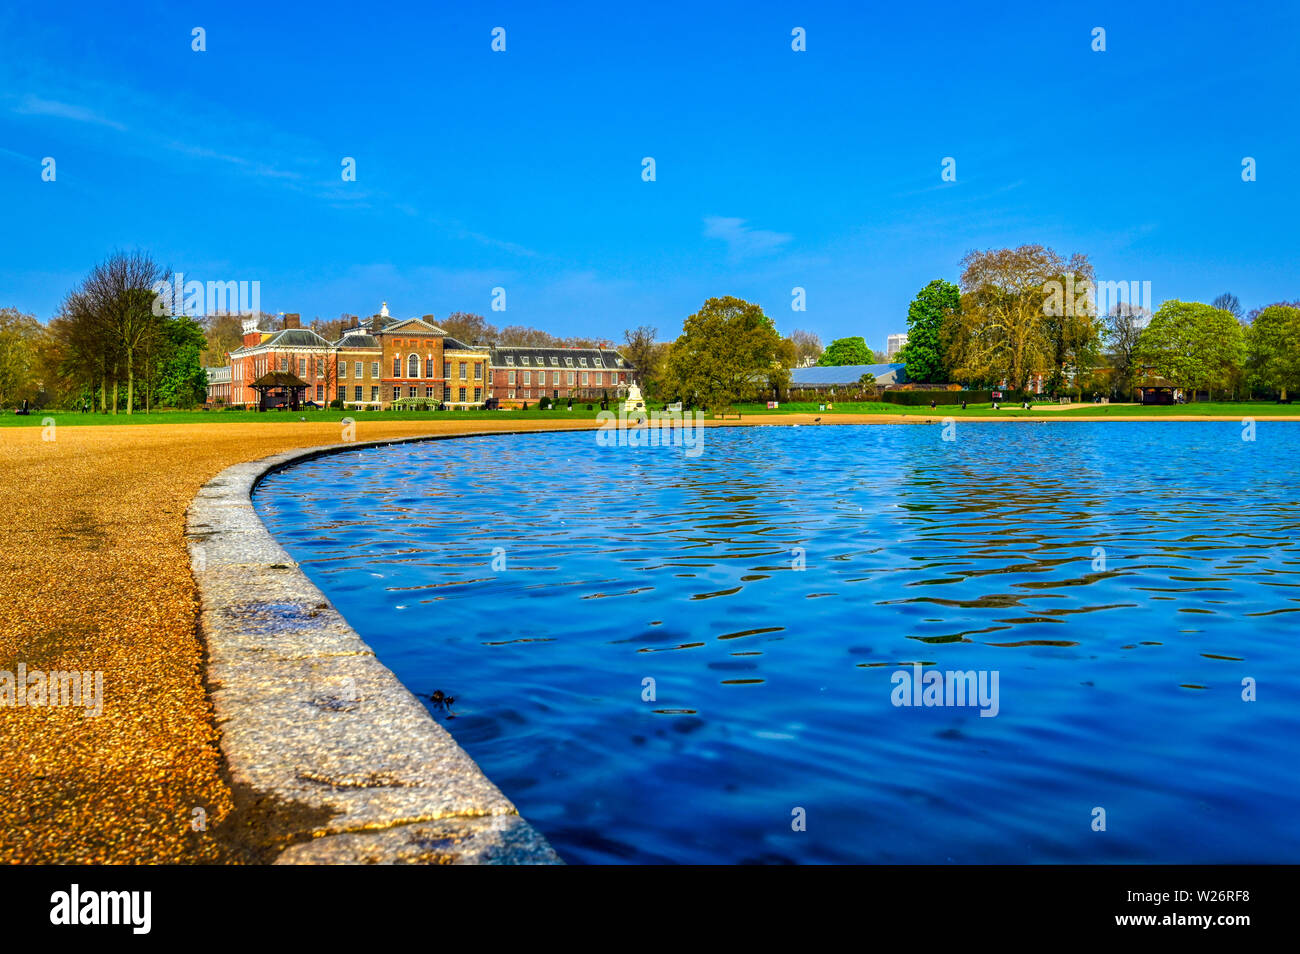 London, United Kingdom - April 17, 2019 : Kensington Palace gardens on a spring morning located in Central London, UK. Stock Photo